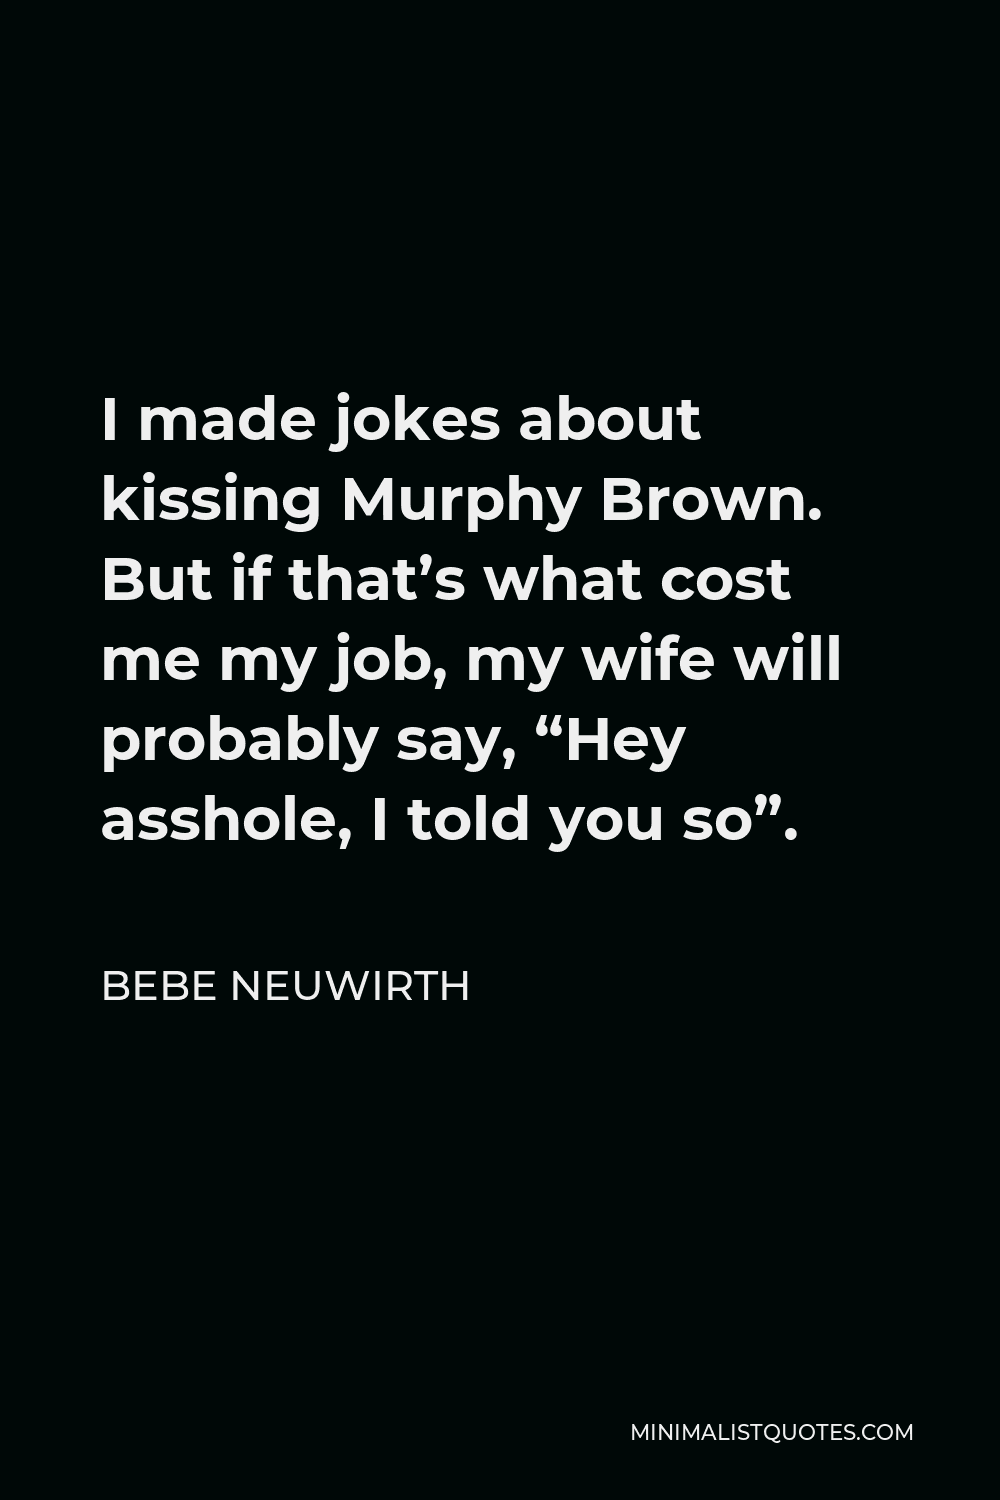 Bebe Neuwirth Quote - I made jokes about kissing Murphy Brown. But if that’s what cost me my job, my wife will probably say, “Hey asshole, I told you so”.